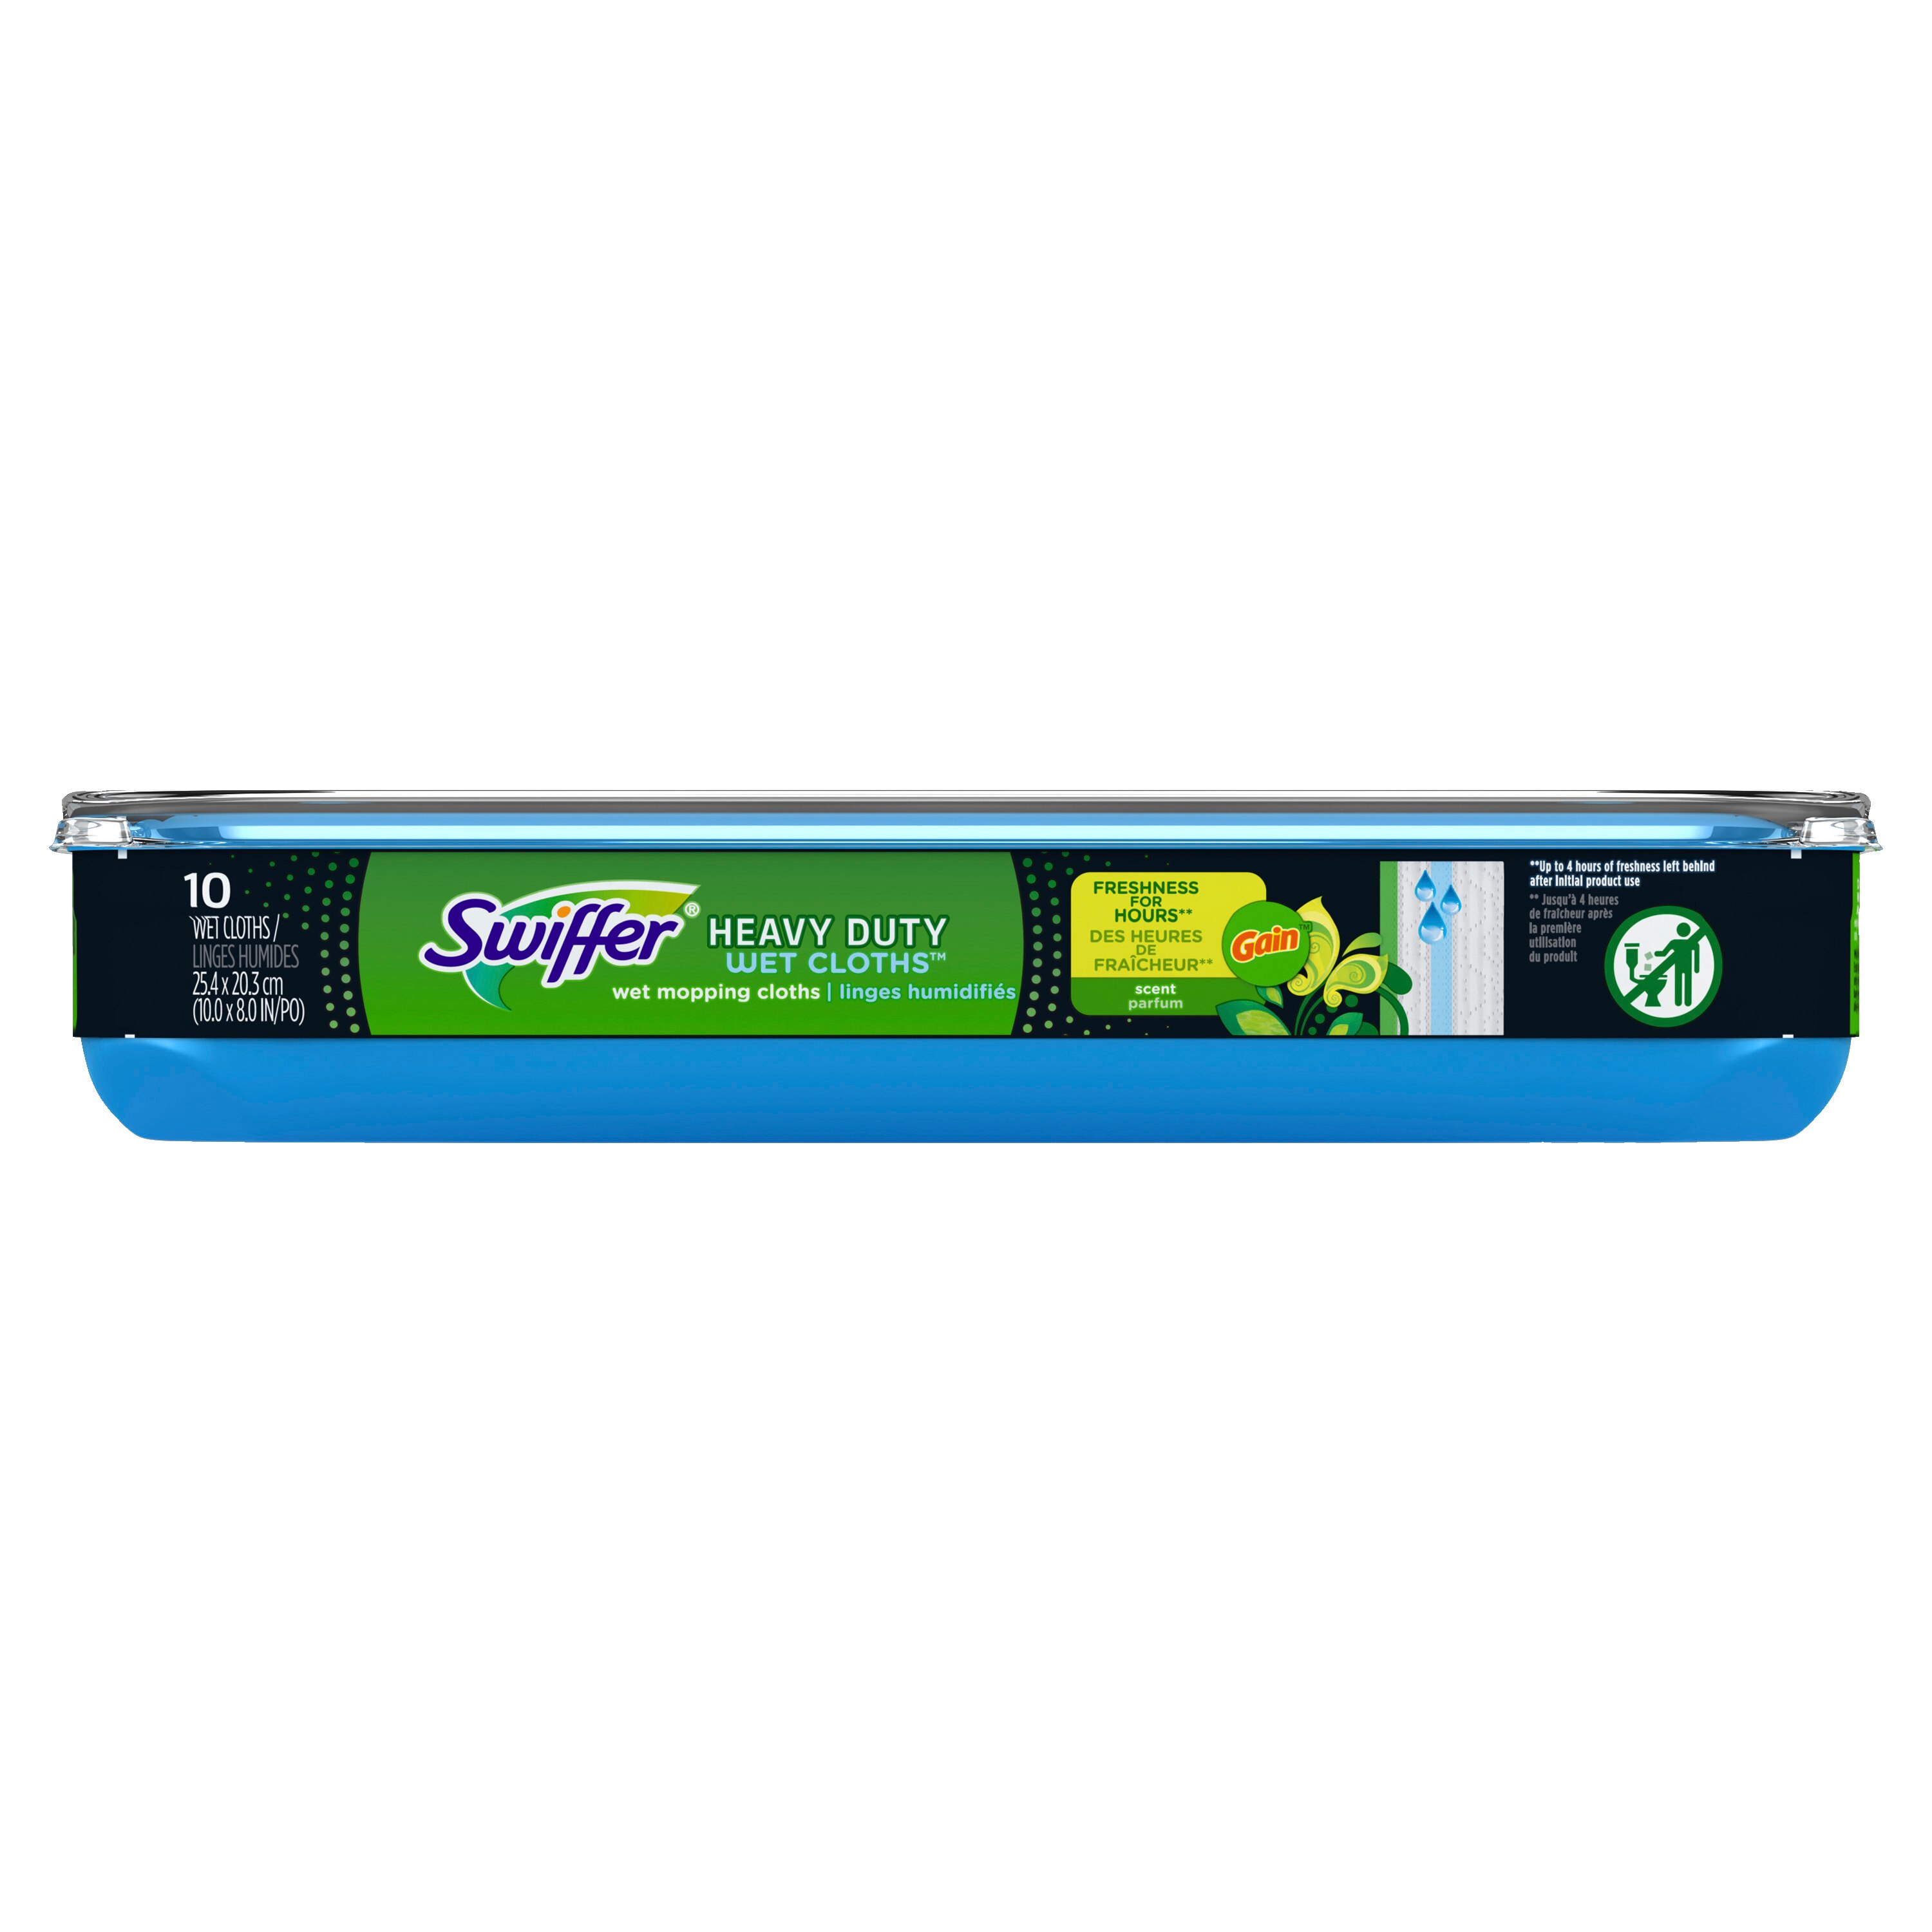 Swiffer Sweeper Heavy Duty Multi-Surface Wet Cloth Refills, For Floor Mopping And Cleaning, Gain Scent, 10 Ct , CVS